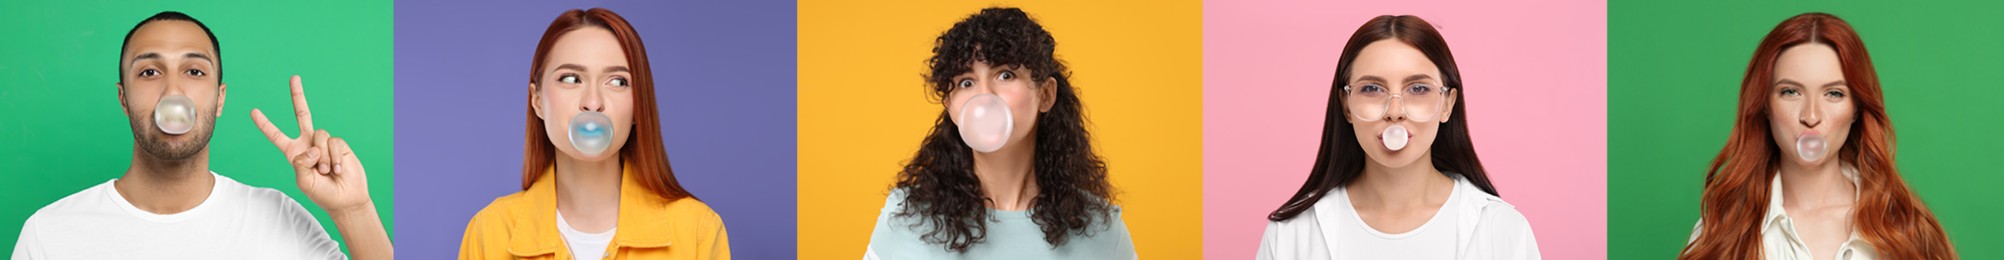 People blowing bubble gums on color backgrounds, set of photos